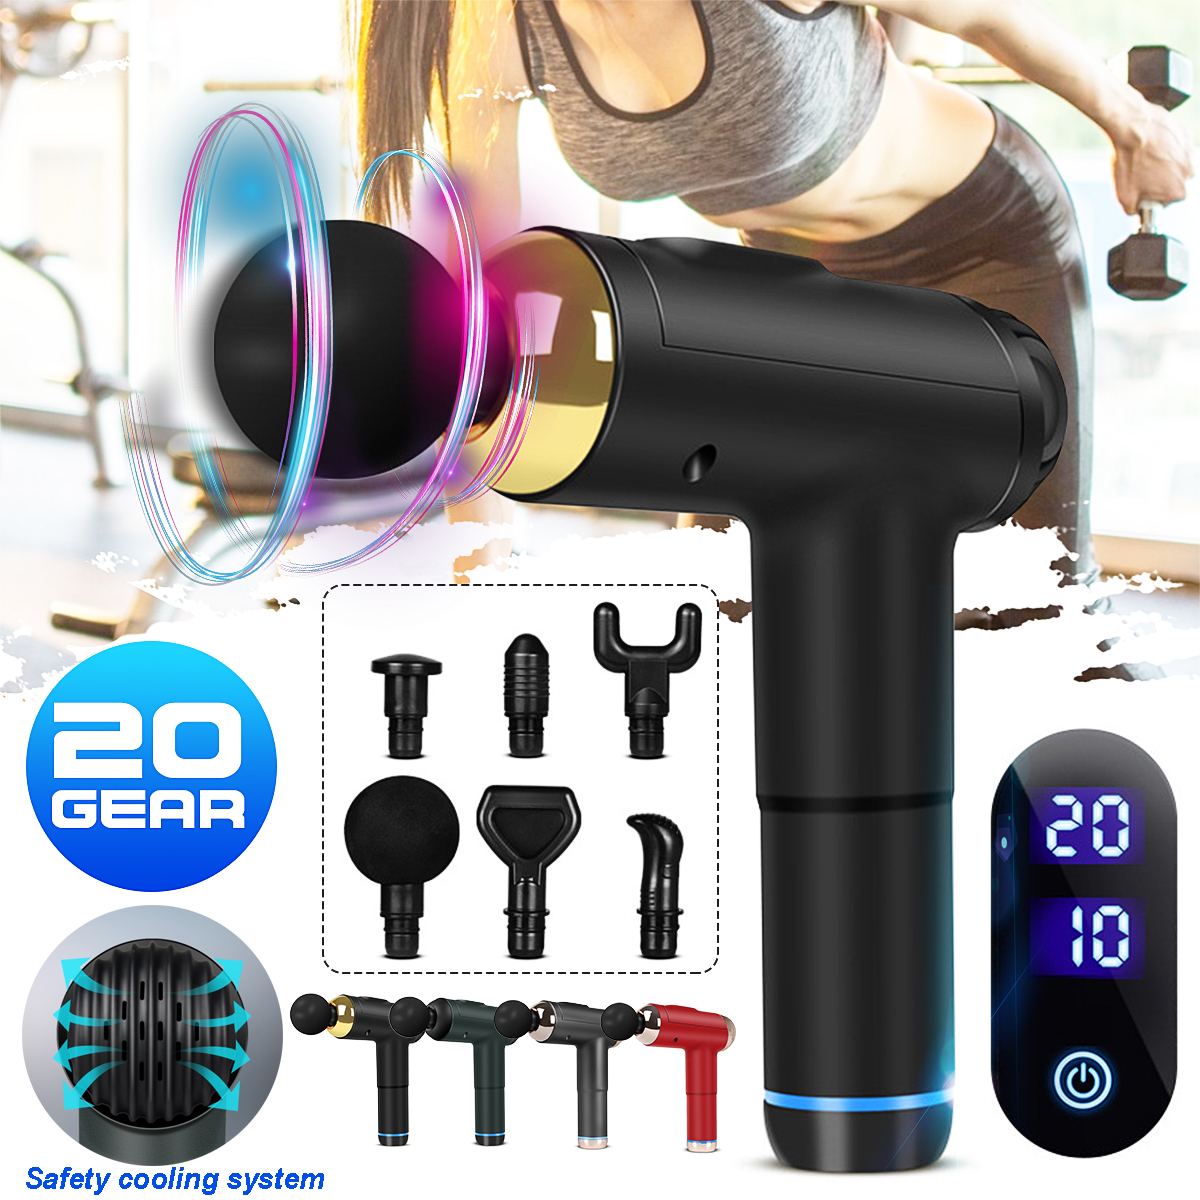 20-Gears-Electric-Percussion-Massager-LED-Digital-Muscle-Pain-Relax-Therapy-Device-W-6-Heads-1727535-1